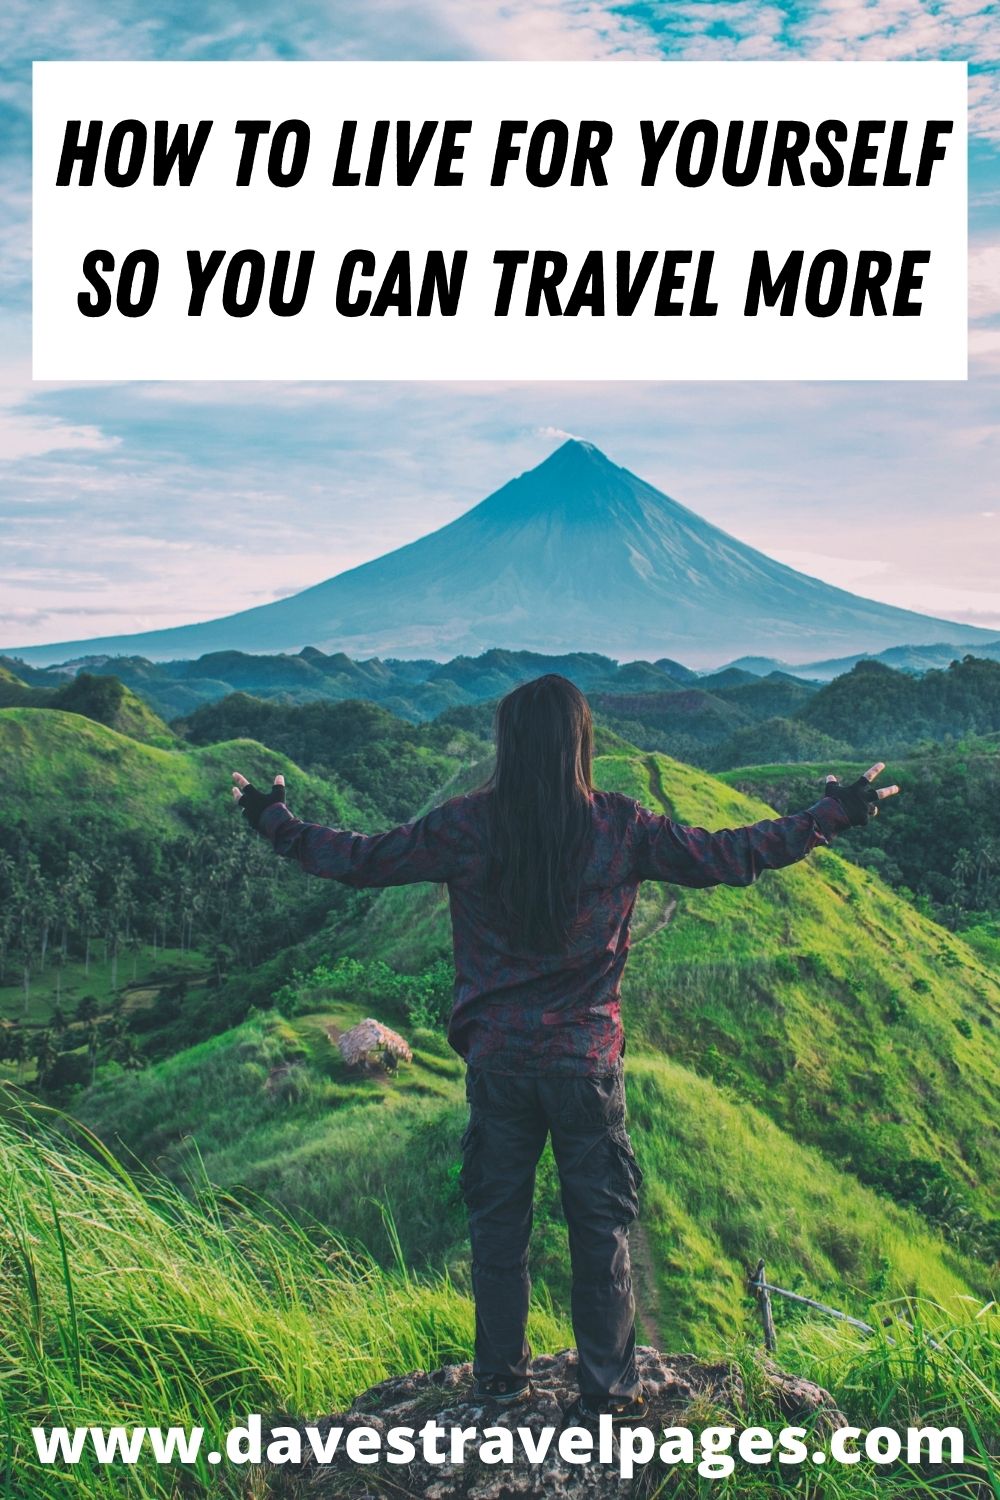 How to live for yourself so you can travel more